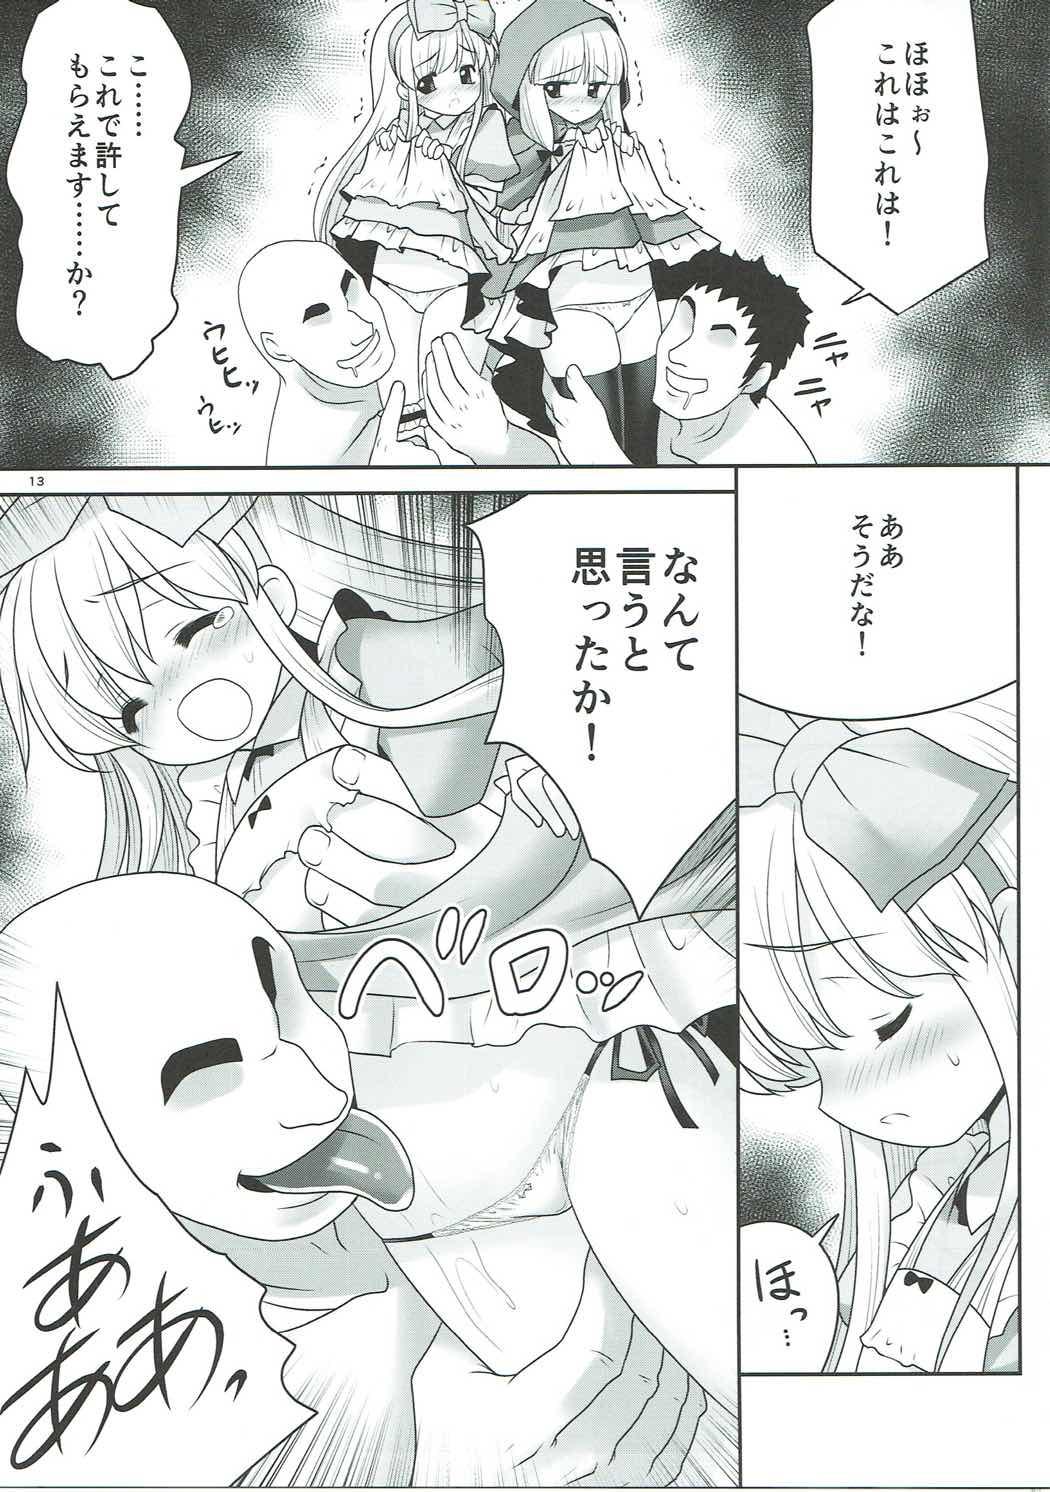 Voyeur Osoware Nureru Ehon no Shoujo - Little red riding hood Alice in the country of hearts Magrinha - Page 12